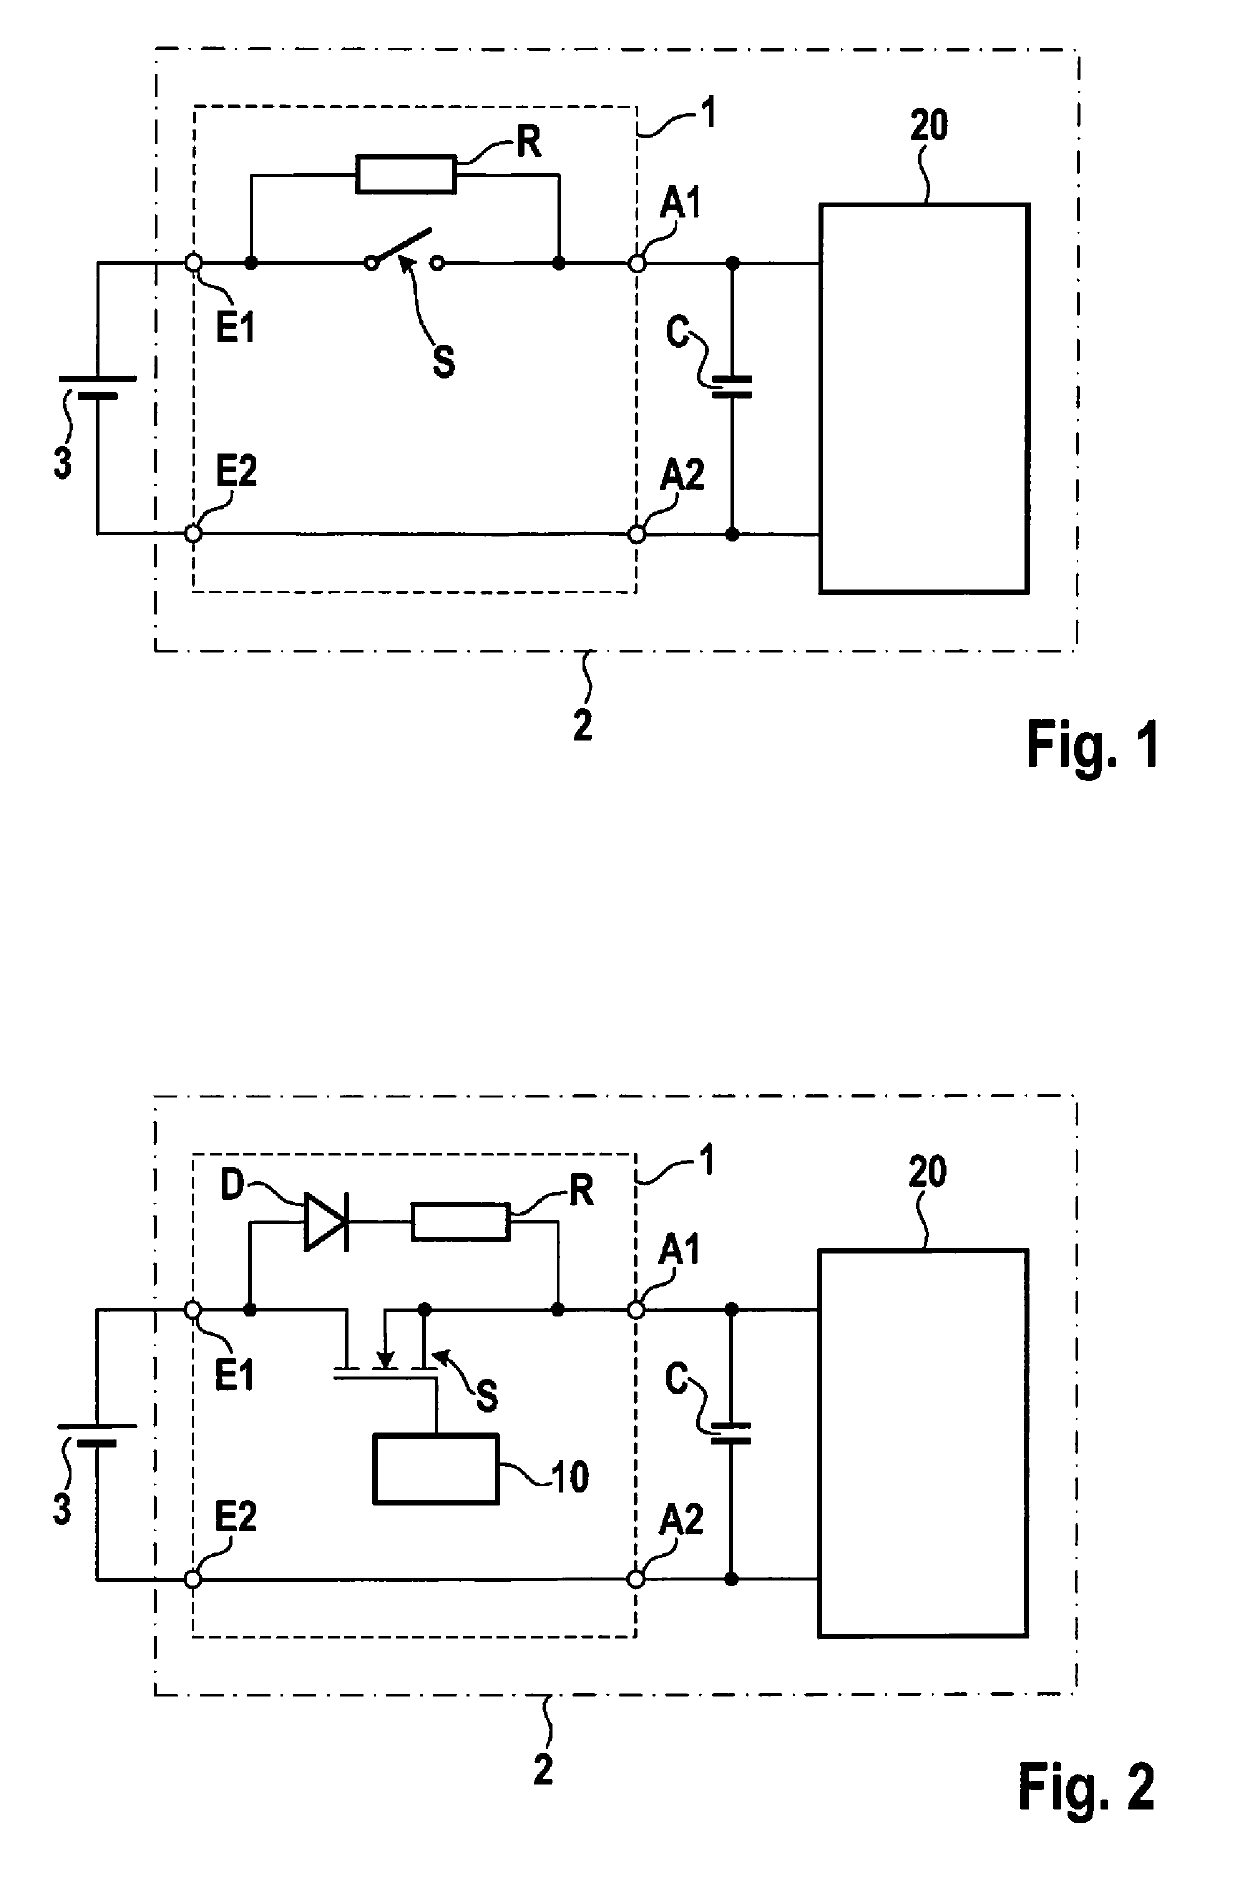 Circuit system for coupling an electrical control unit to a voltage supply, and electrical control unit